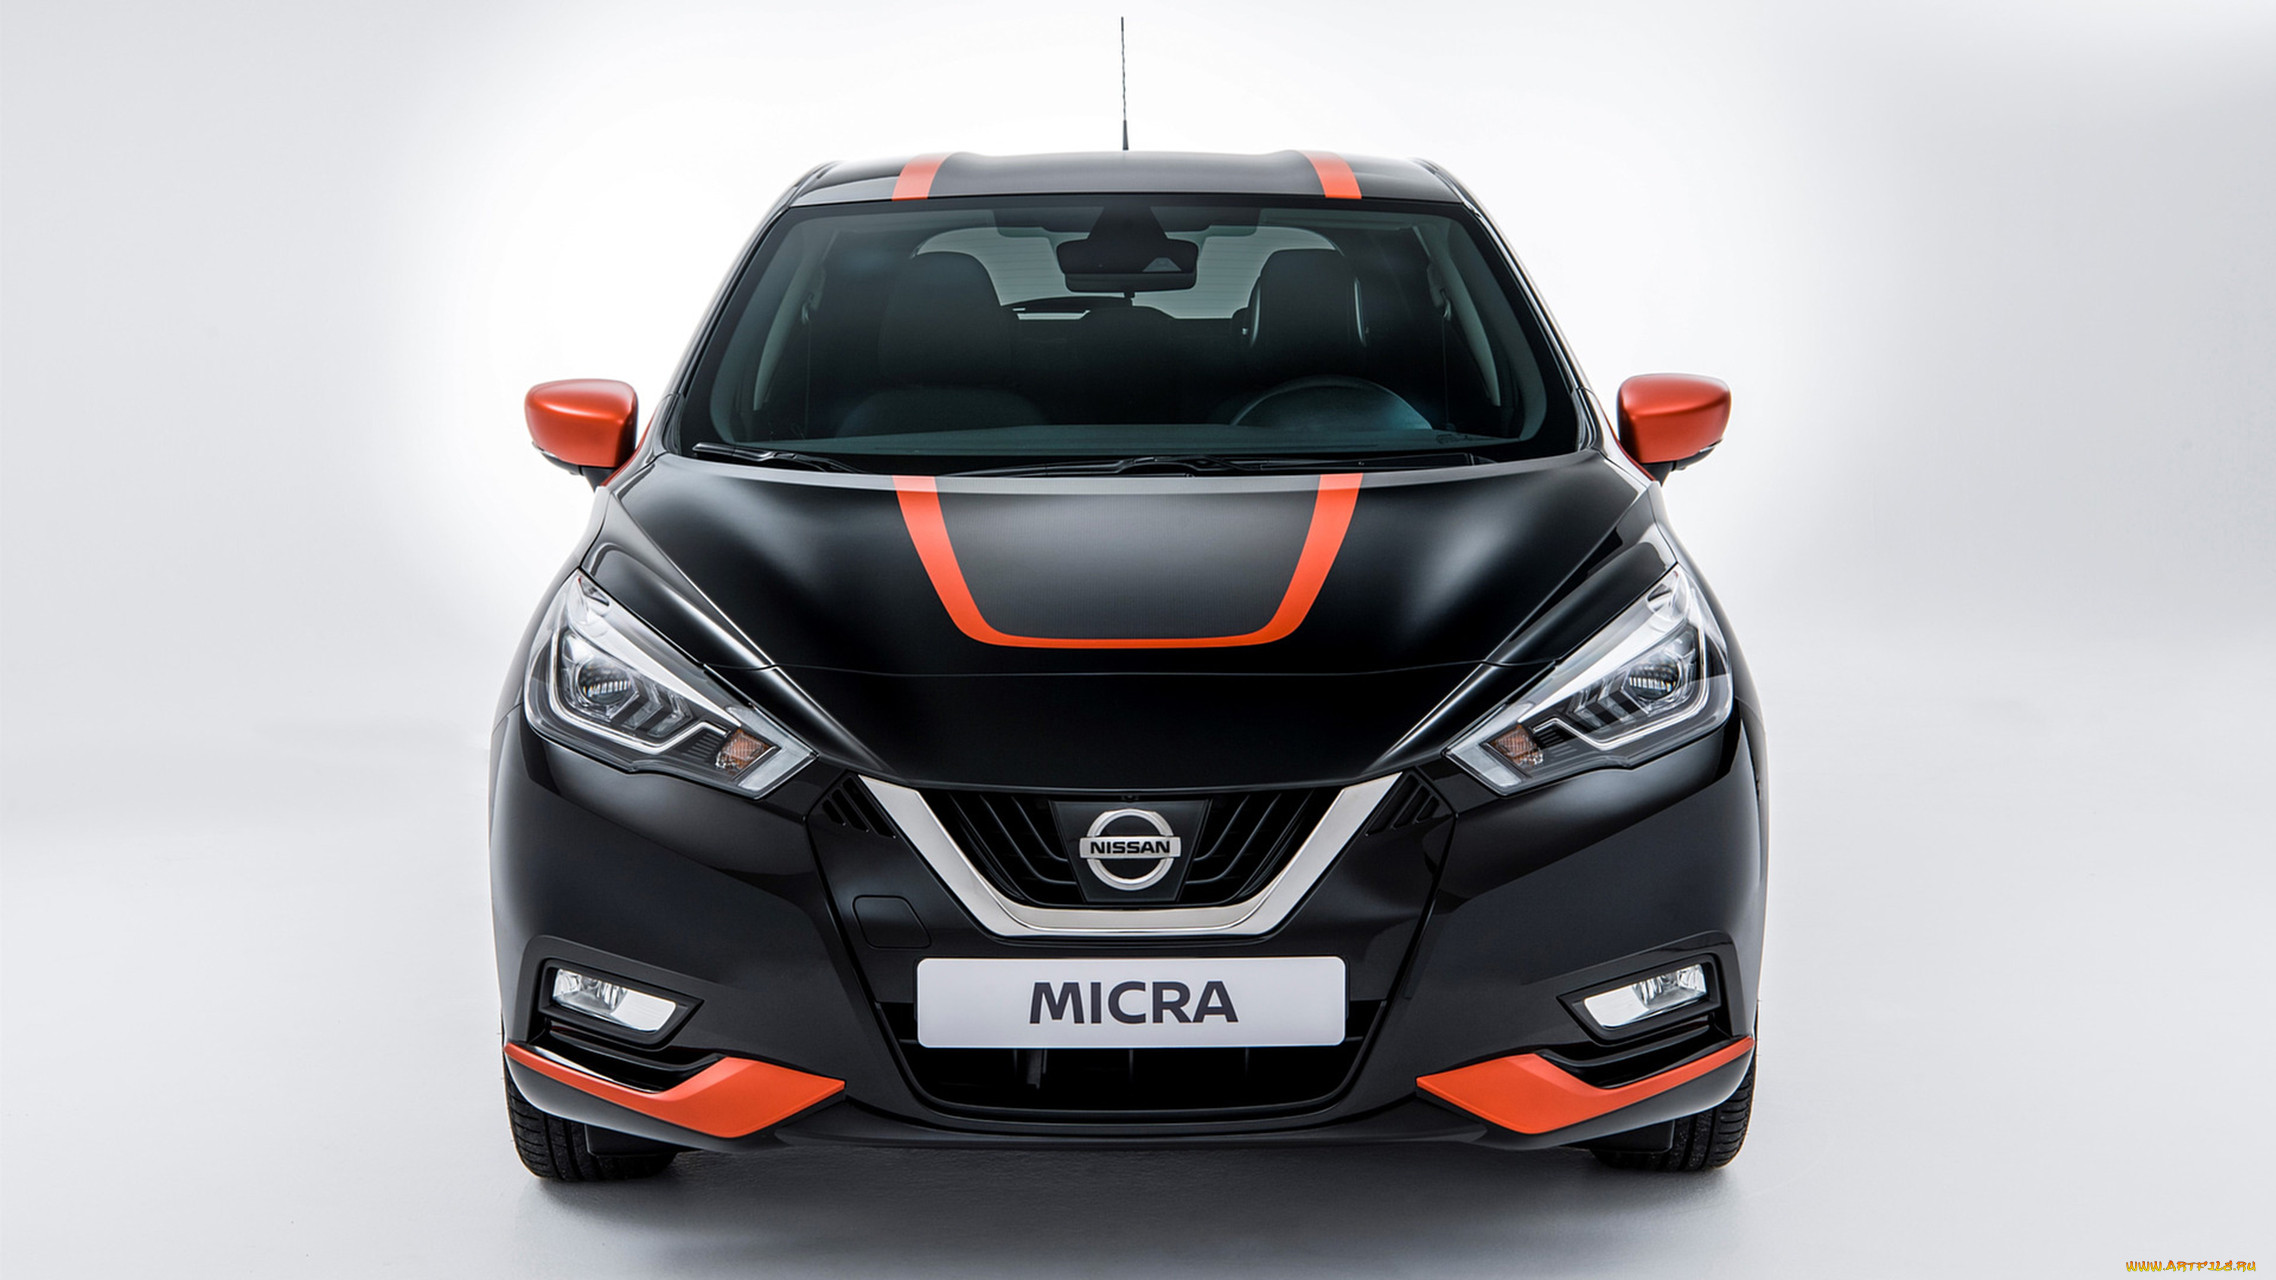 nissan micra bose personal edition 2017, , nissan, datsun, 2017, edition, personal, bose, micra